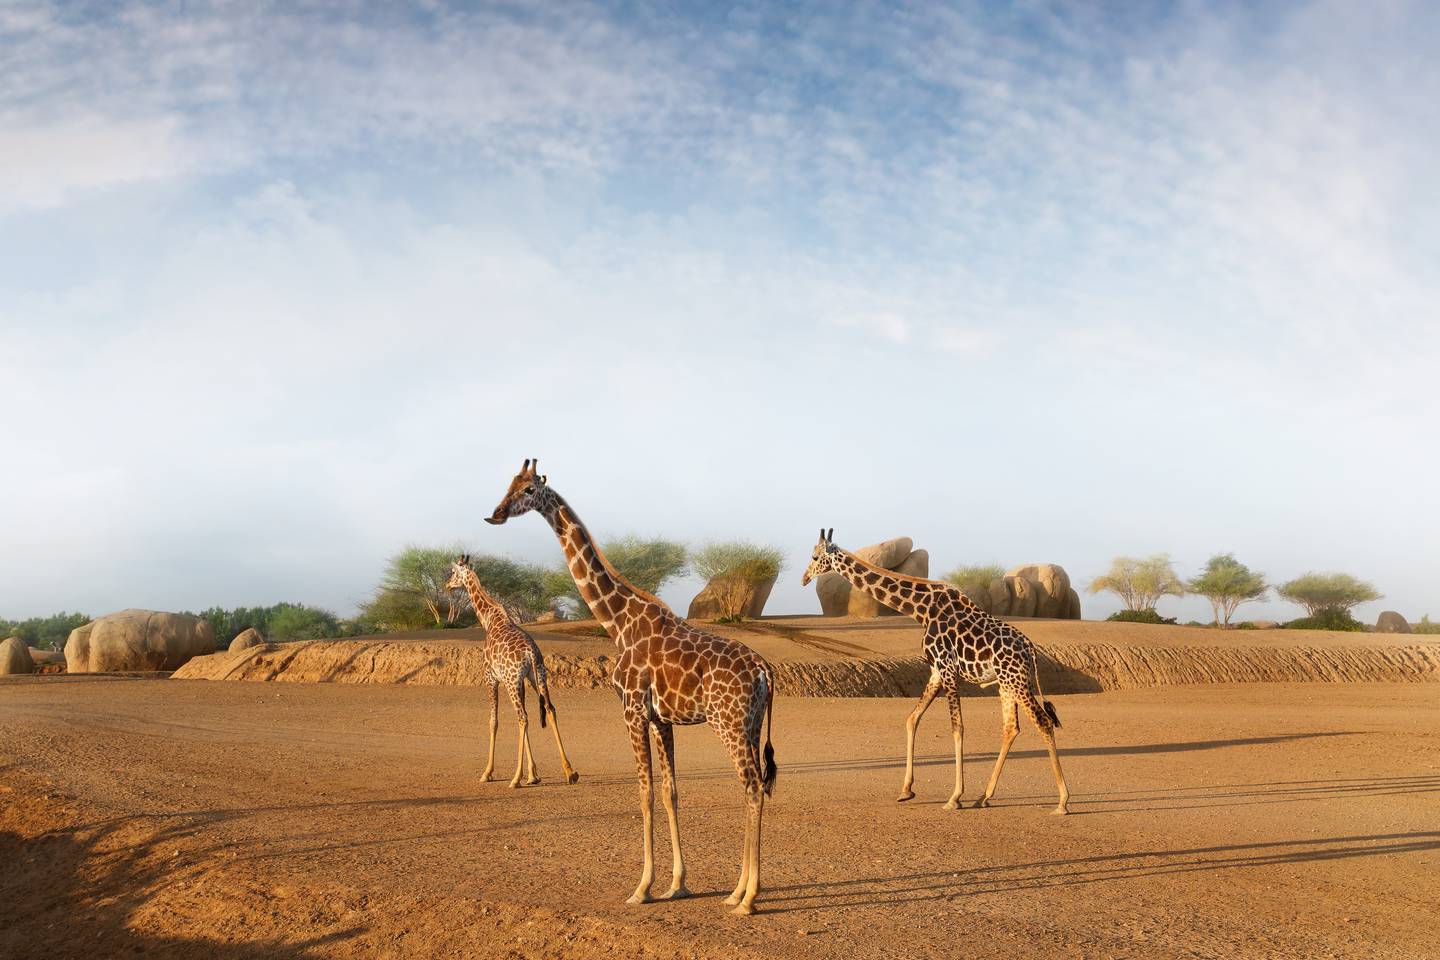 Head out on safari at Al Ain Zoo to get up close and personal with the Big 5. Photo: Al Ain Zoo